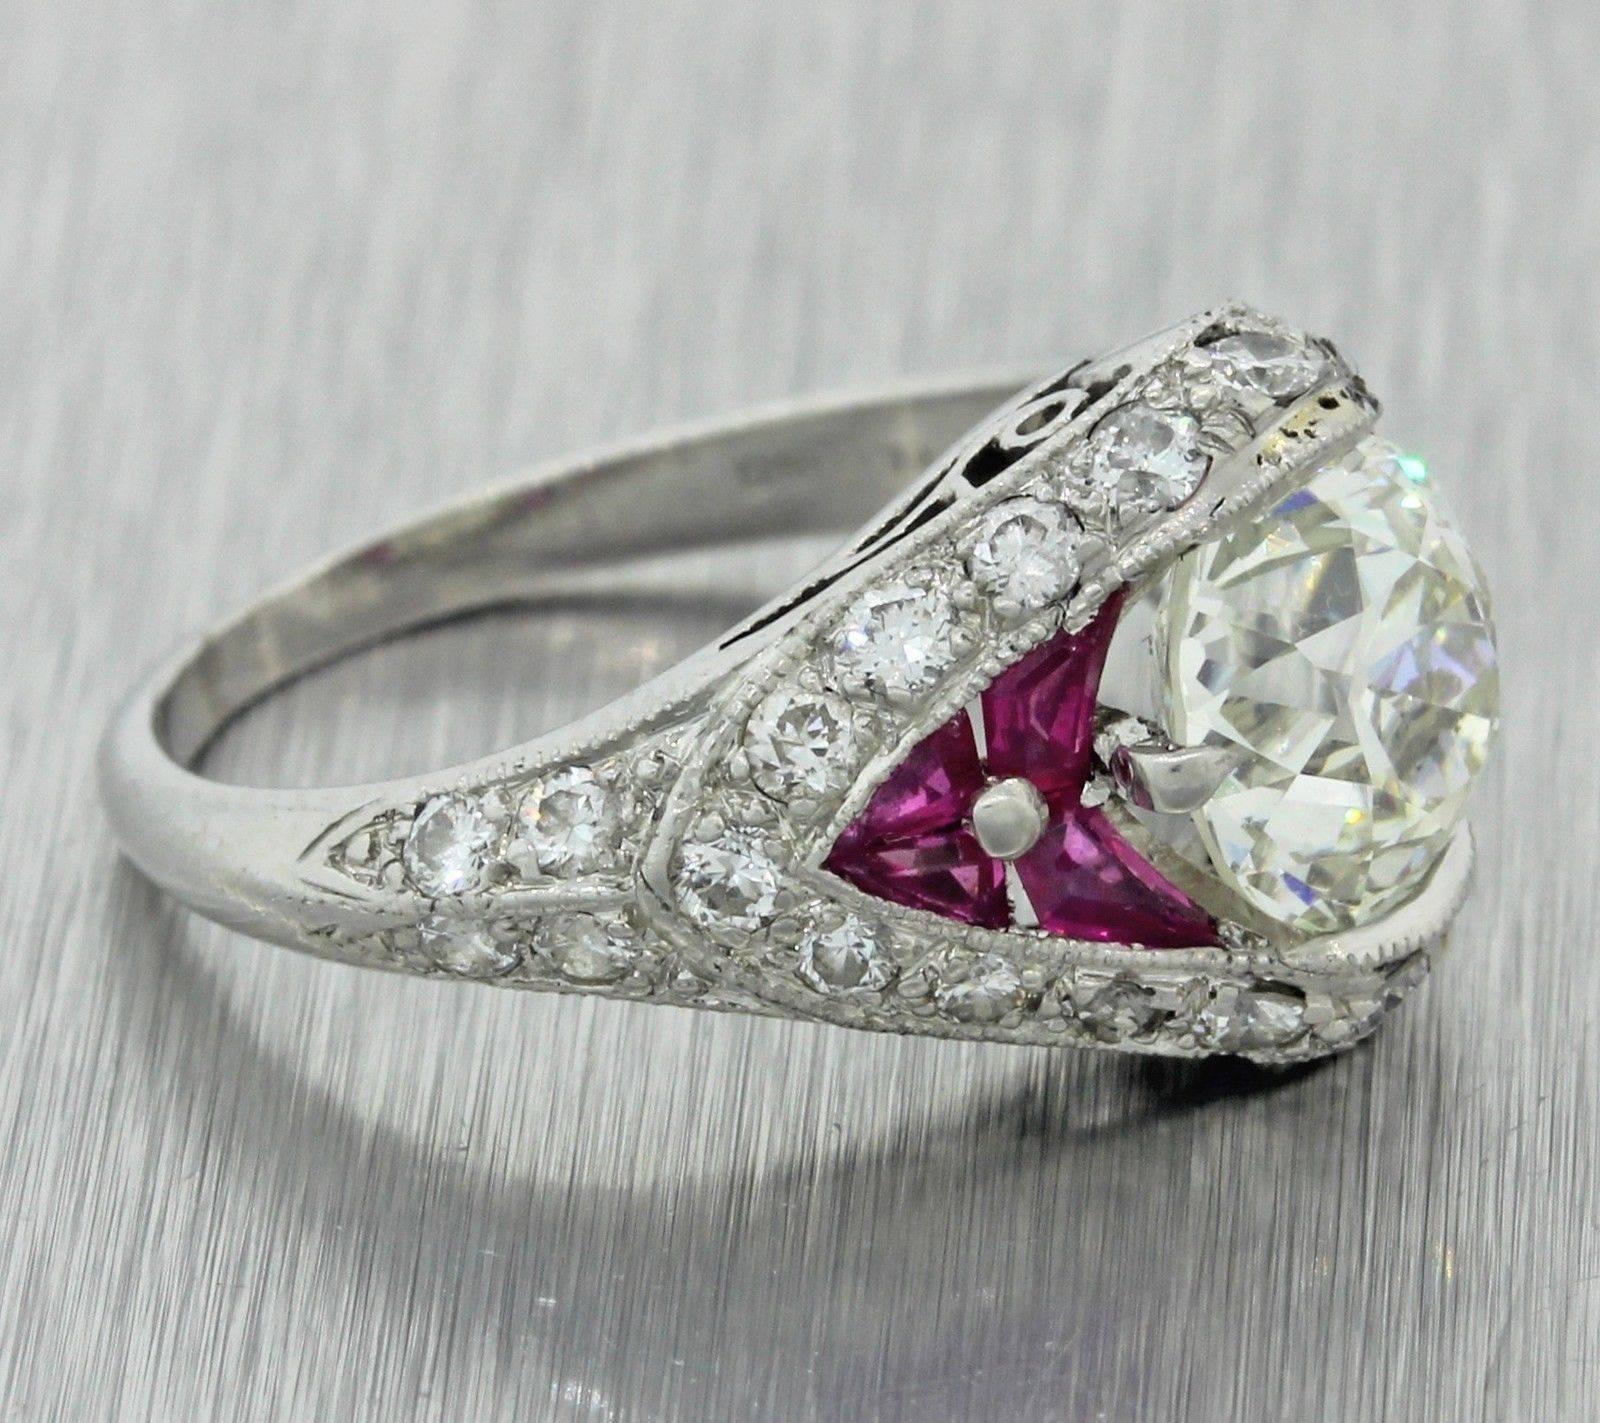 This is a beautiful 1920s Antique Art Deco Solid Platinum 2.53ctw Diamond Ruby Engagement Ring EGL. The ring has been certified by E GL, one of the world's leaders in diamond grading. The MSRP is $22,000.00.  It will come in a lovely ring box for a